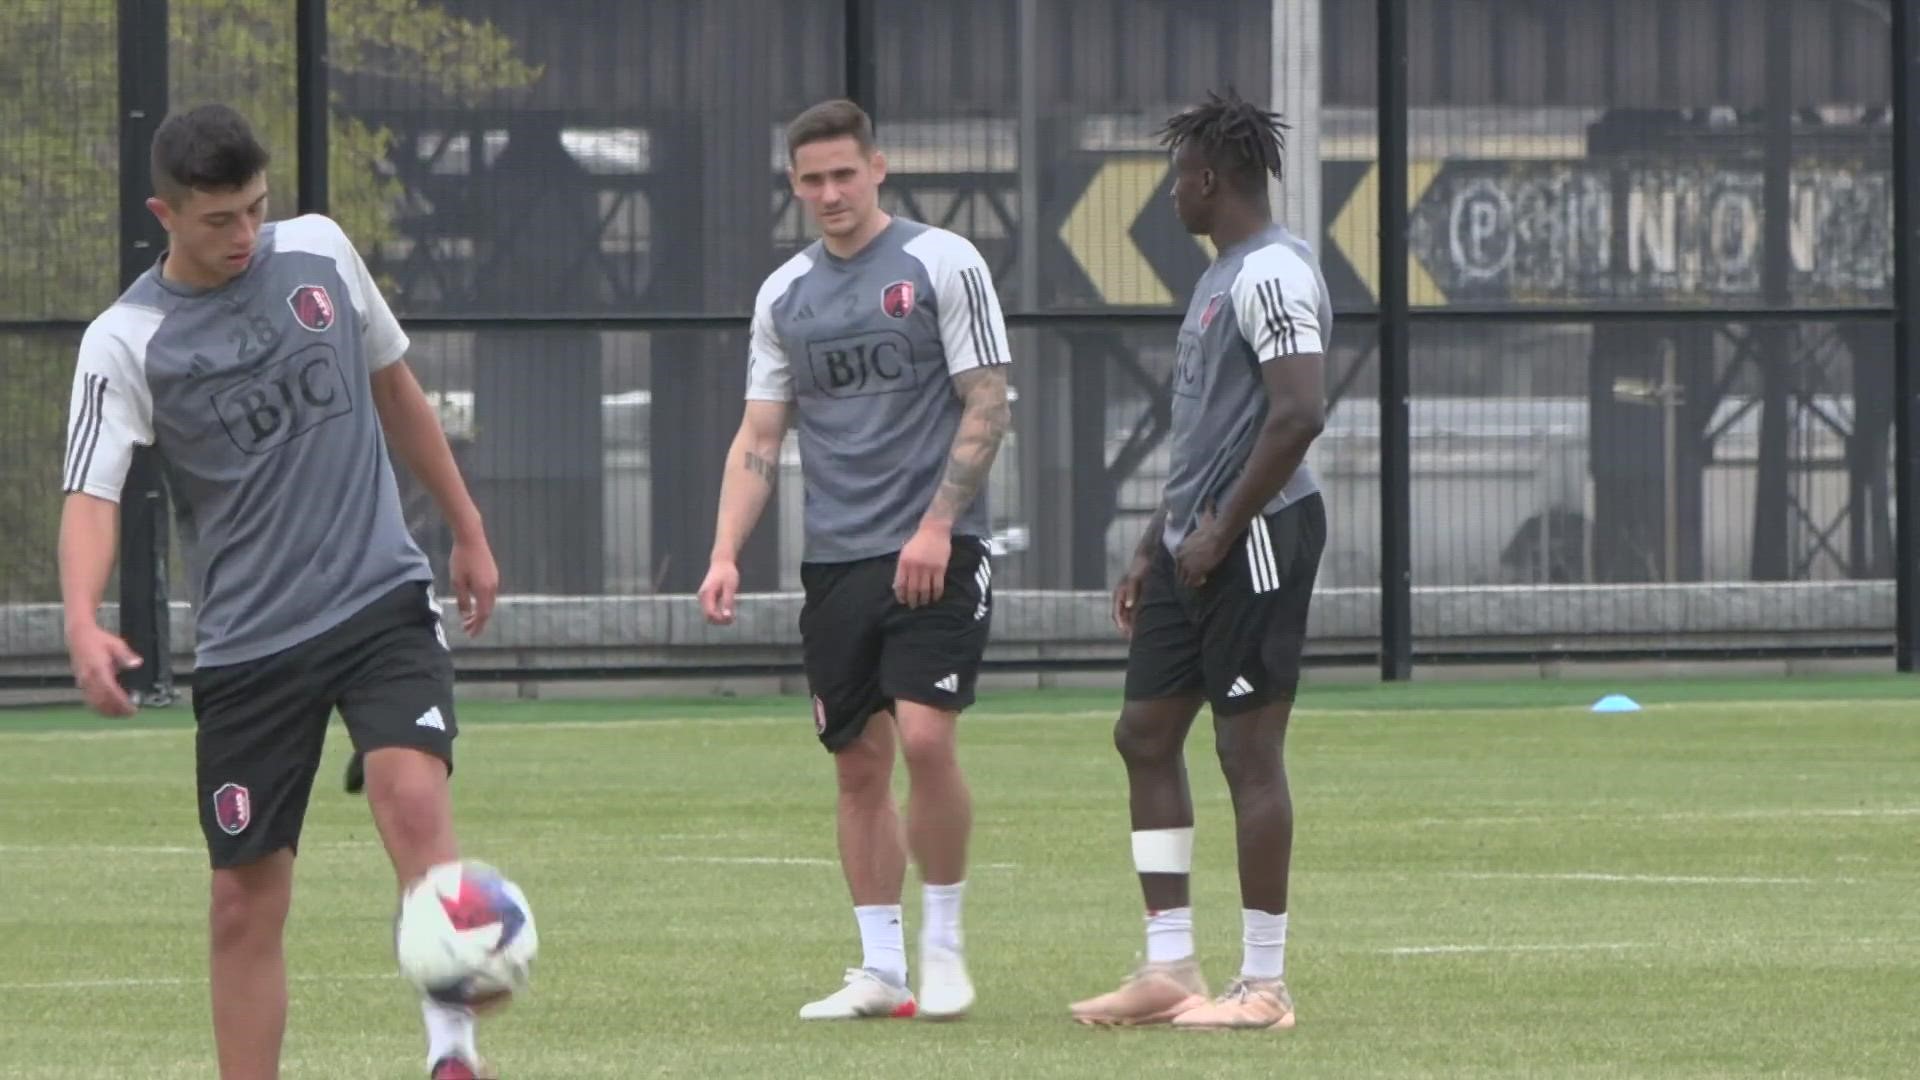 St. Louis CITY SC hits the pitch Saturday in Austin, Texas. But what expectations does the team have for the upcoming season?